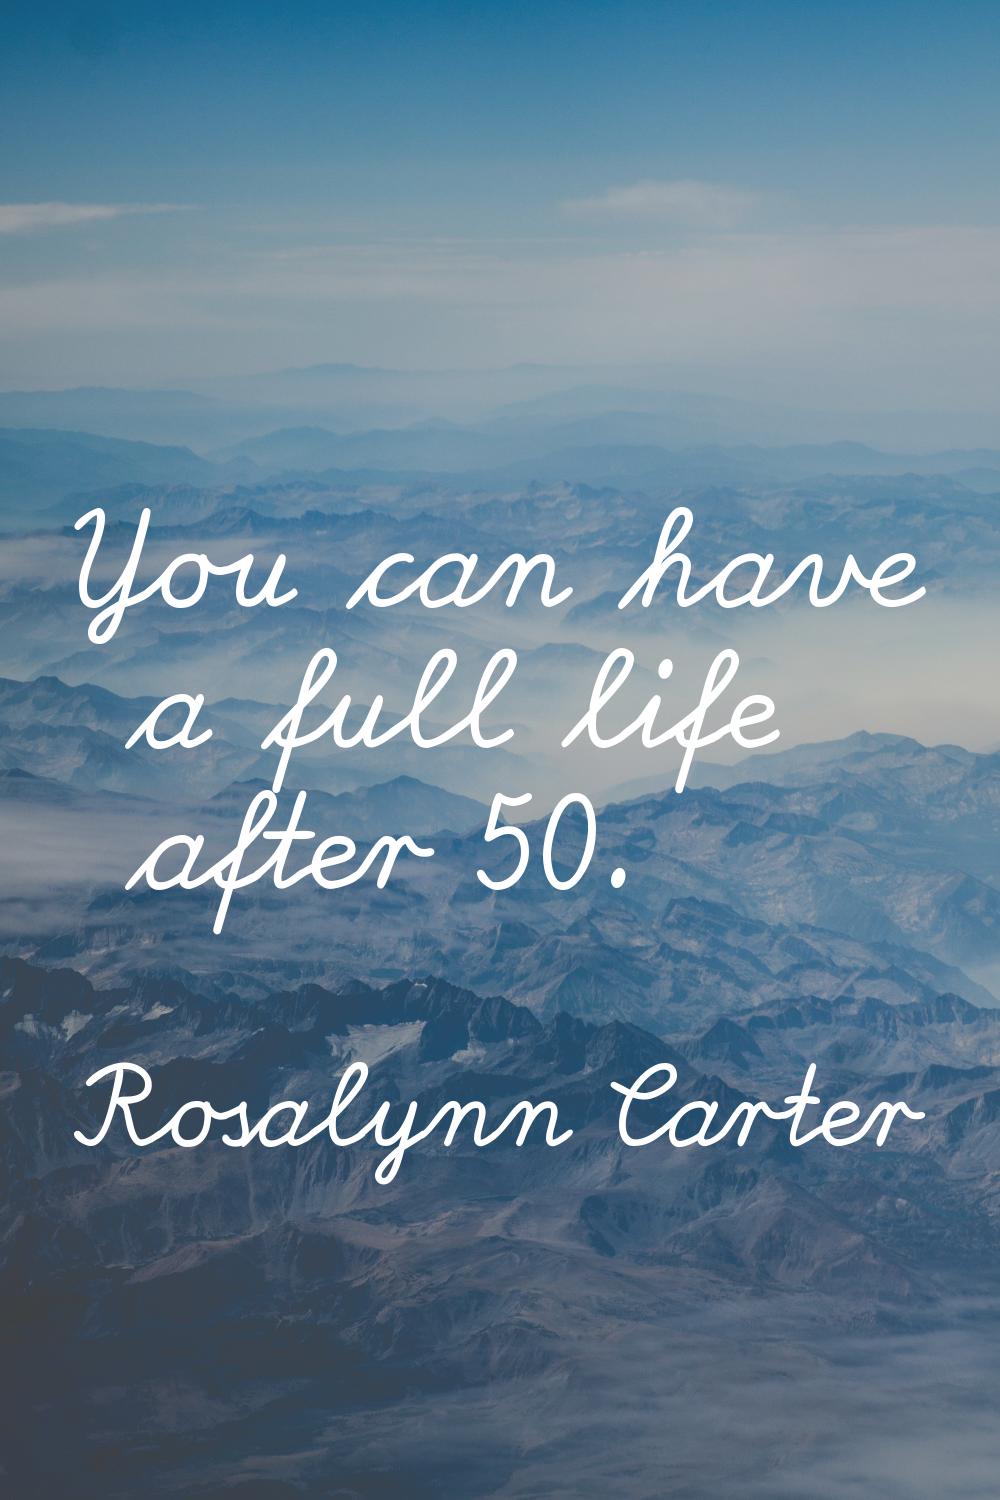 You can have a full life after 50.